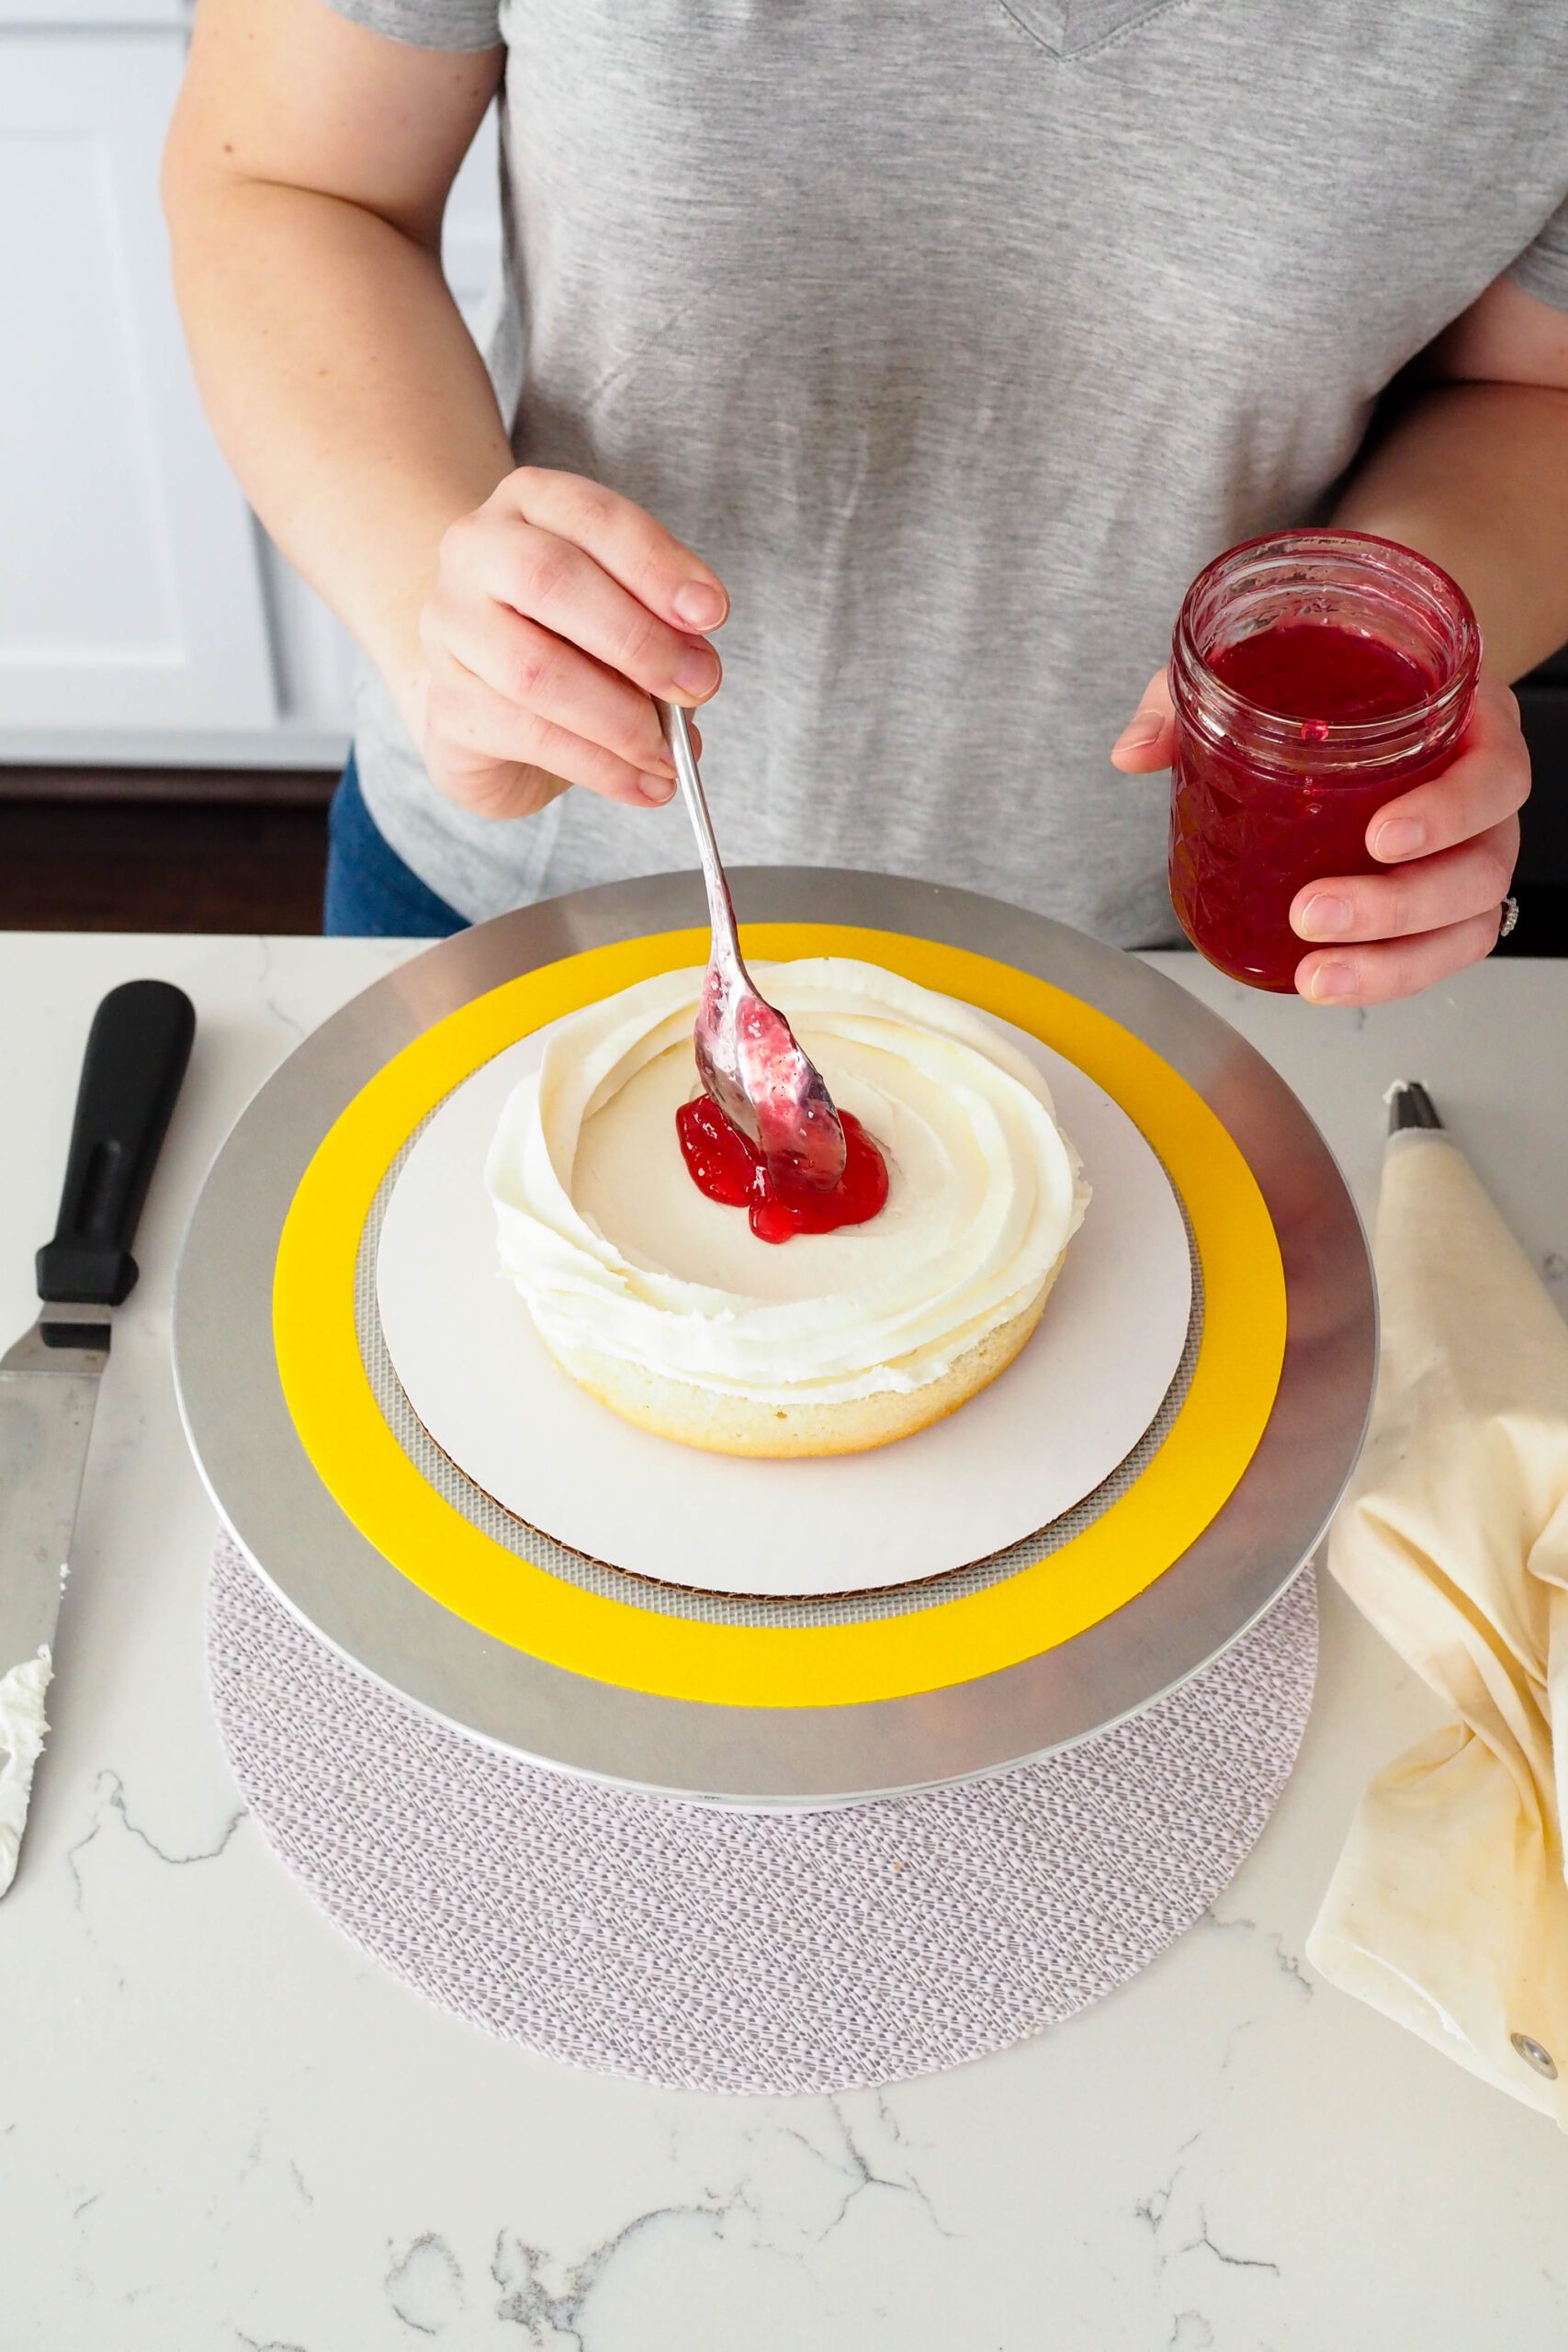 Pomegranate jelly is spooned into the center of a white cake layer with a ring of white chocolate buttercream around it.